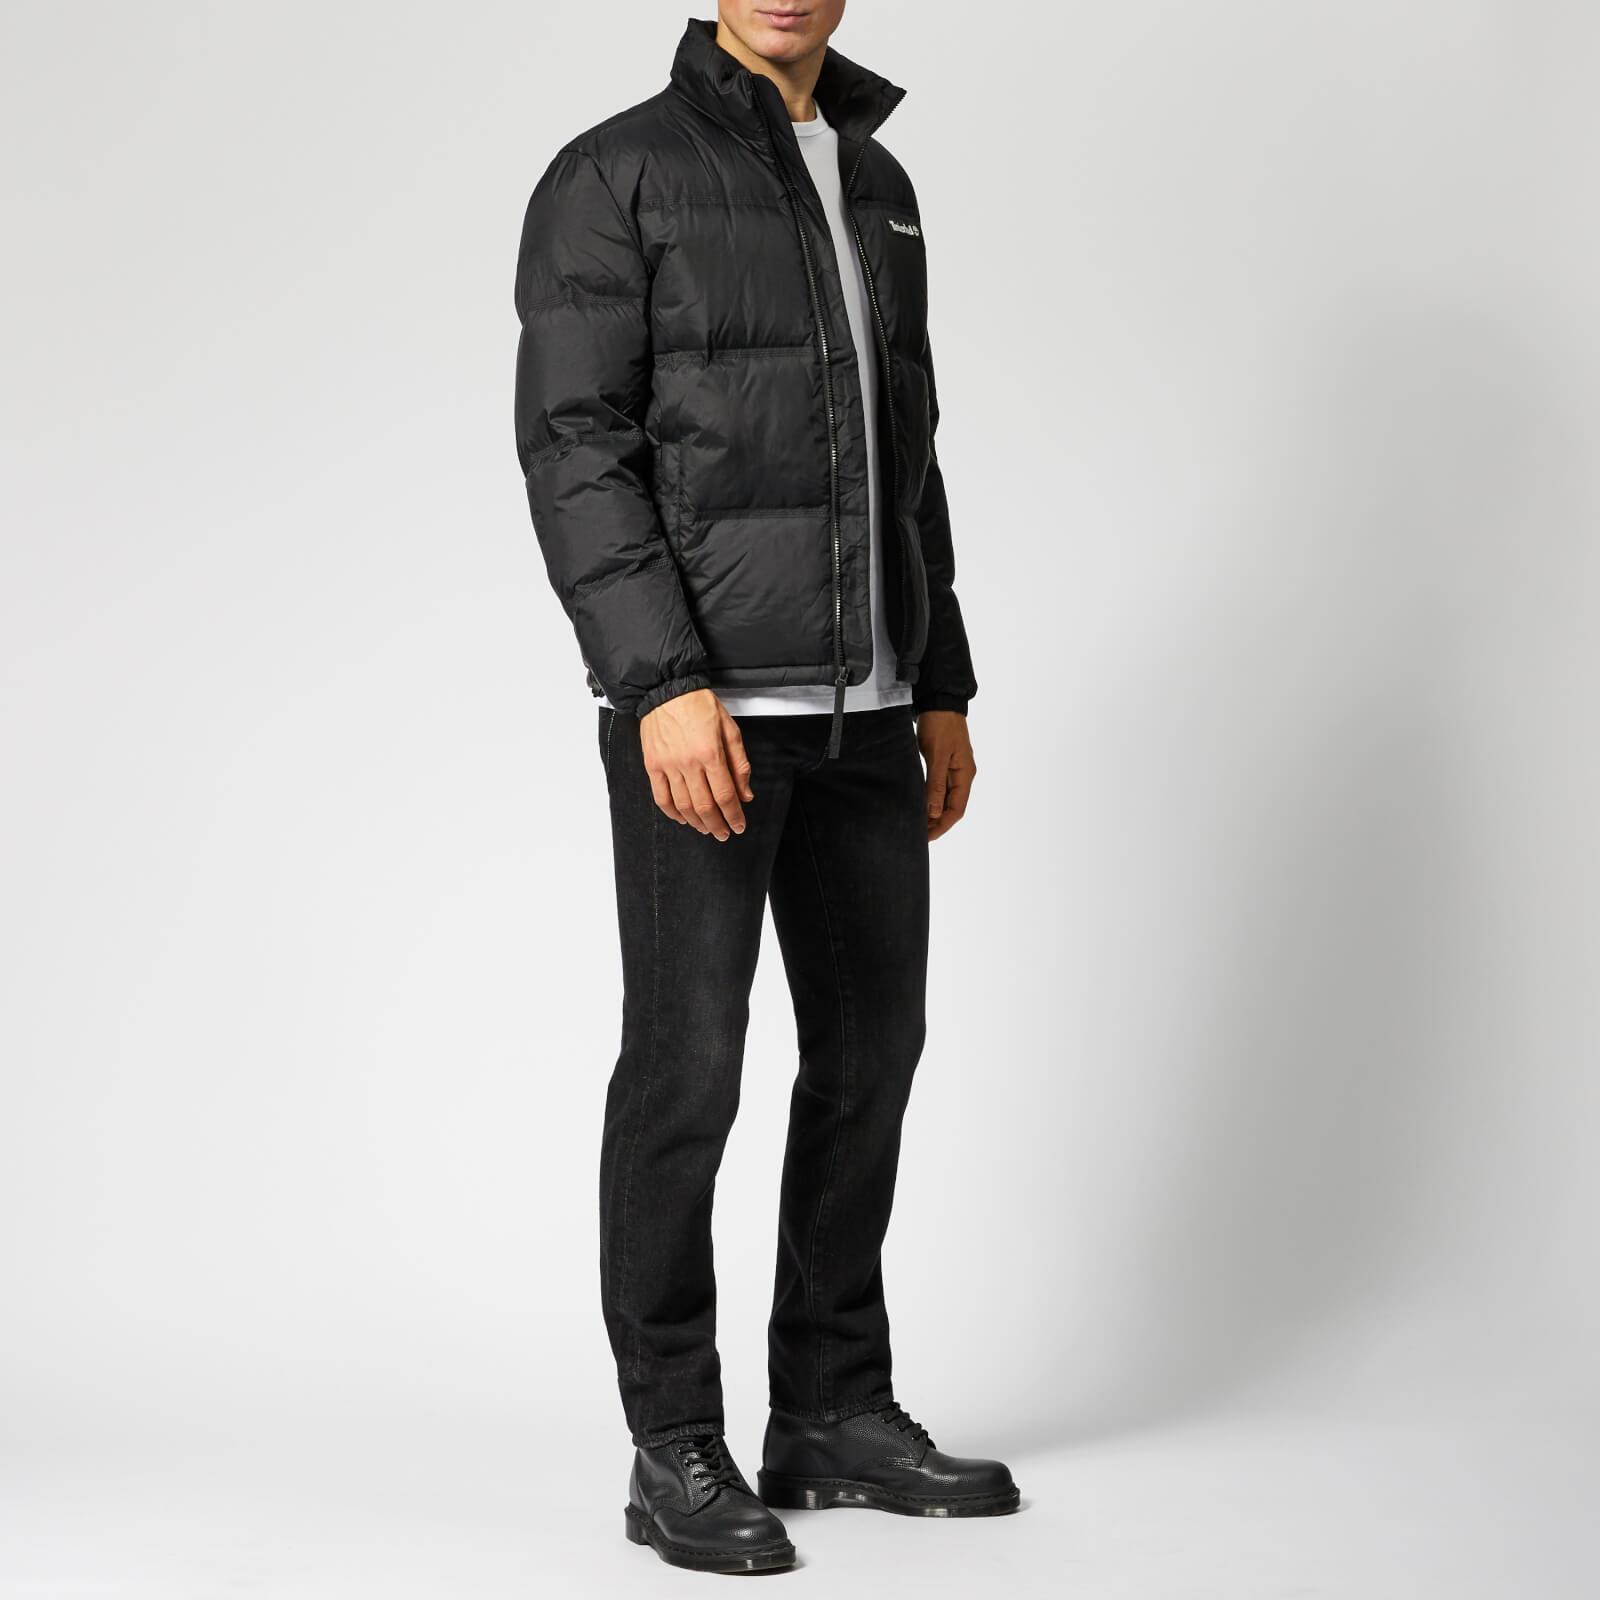 Timberland Synthetic Sls Down Puffer Jacket in Black for Men - Lyst